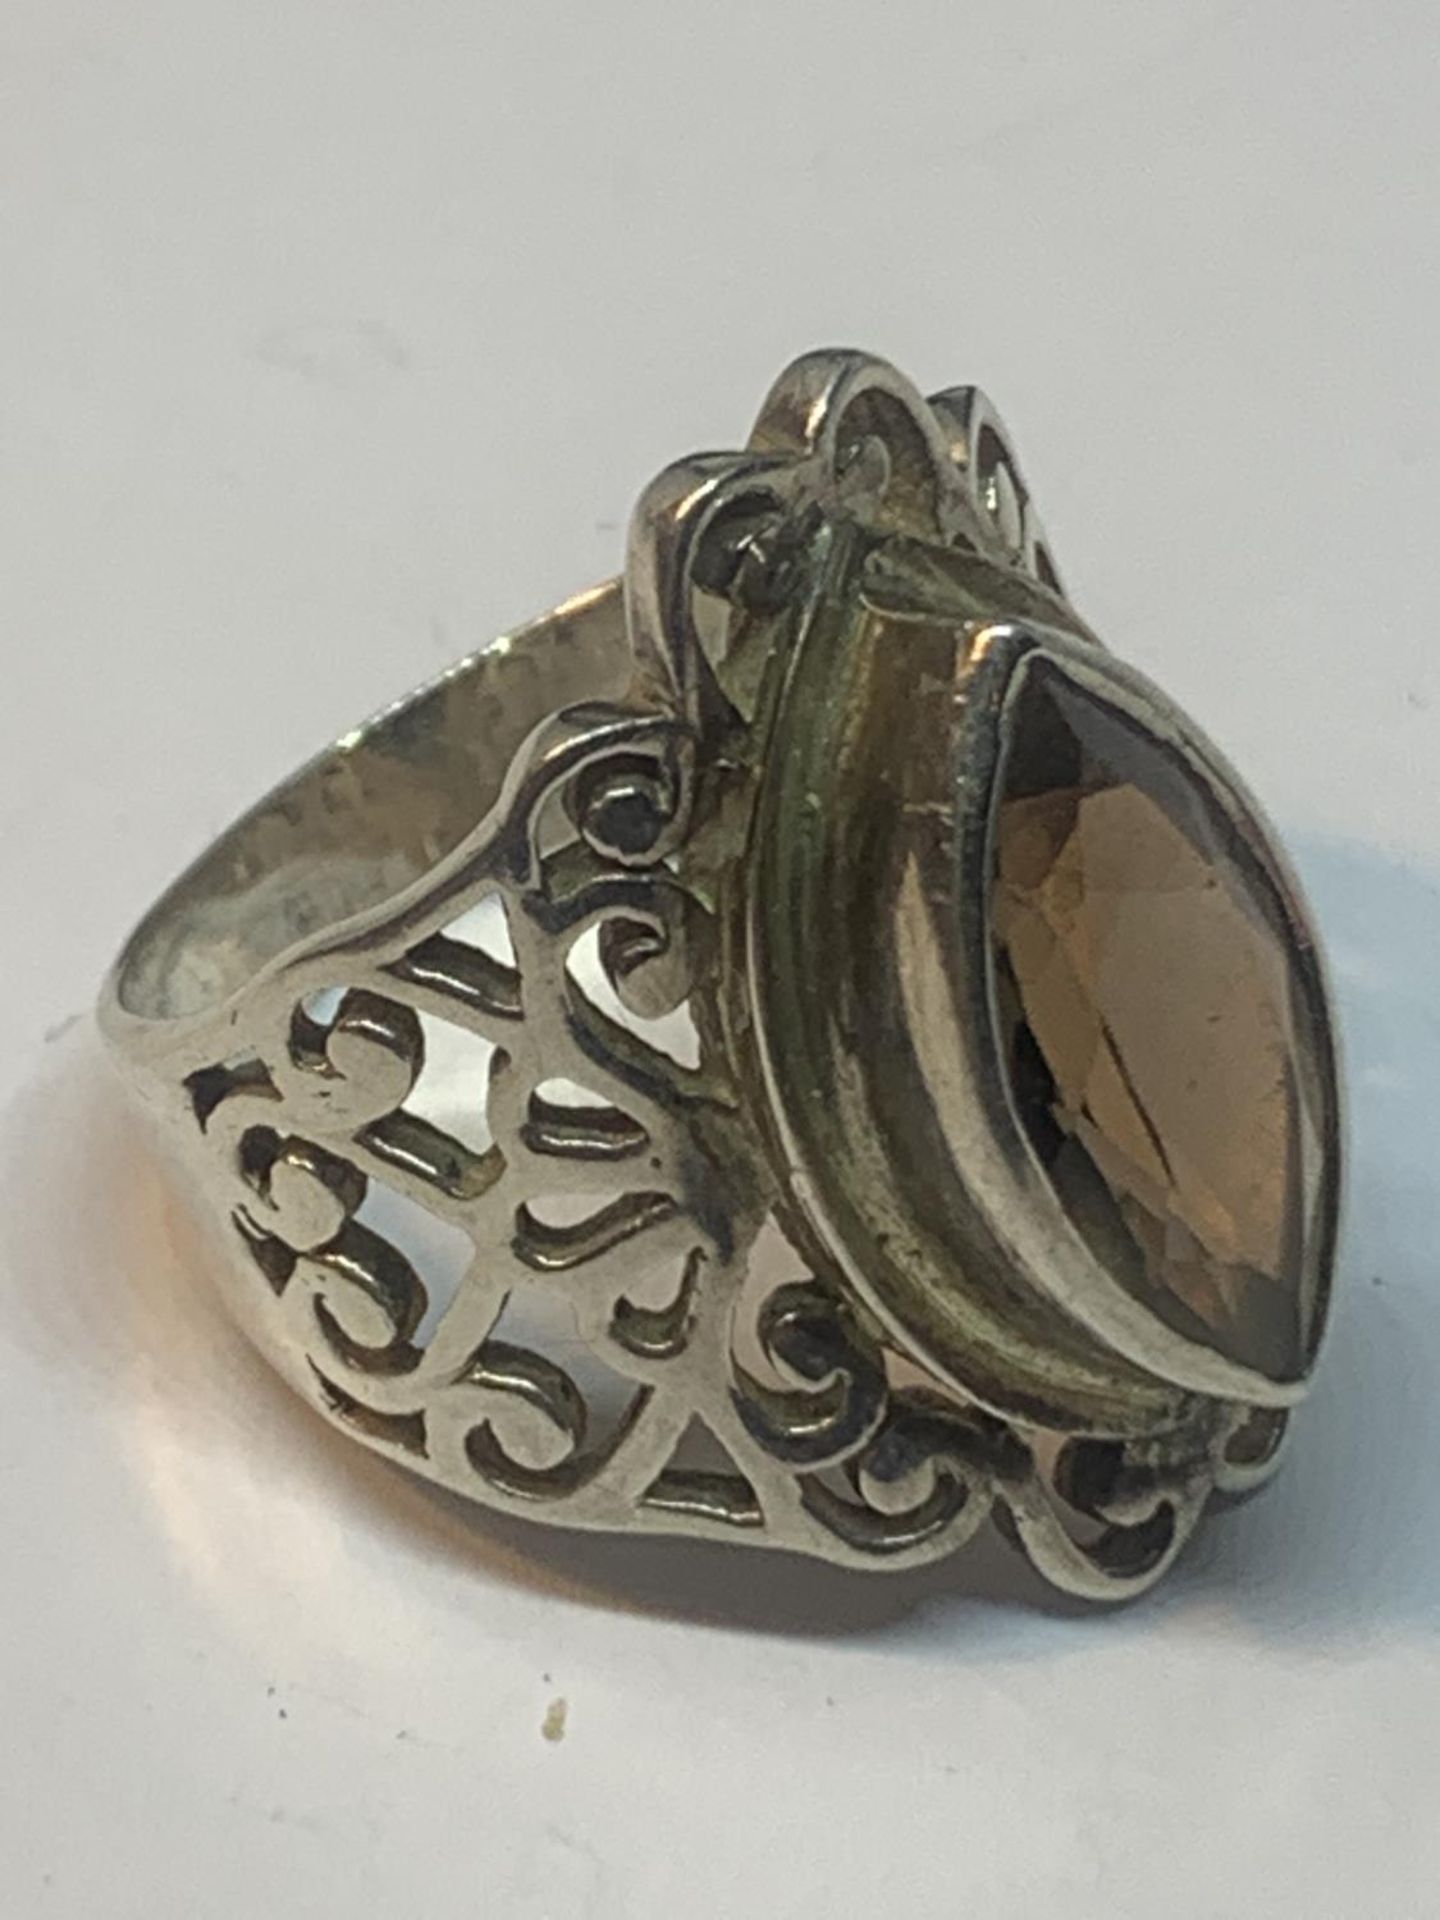 A SILVER DRESS RING WITH A SMOKEY STONE IN A PRESENTATION BOX - Image 2 of 4